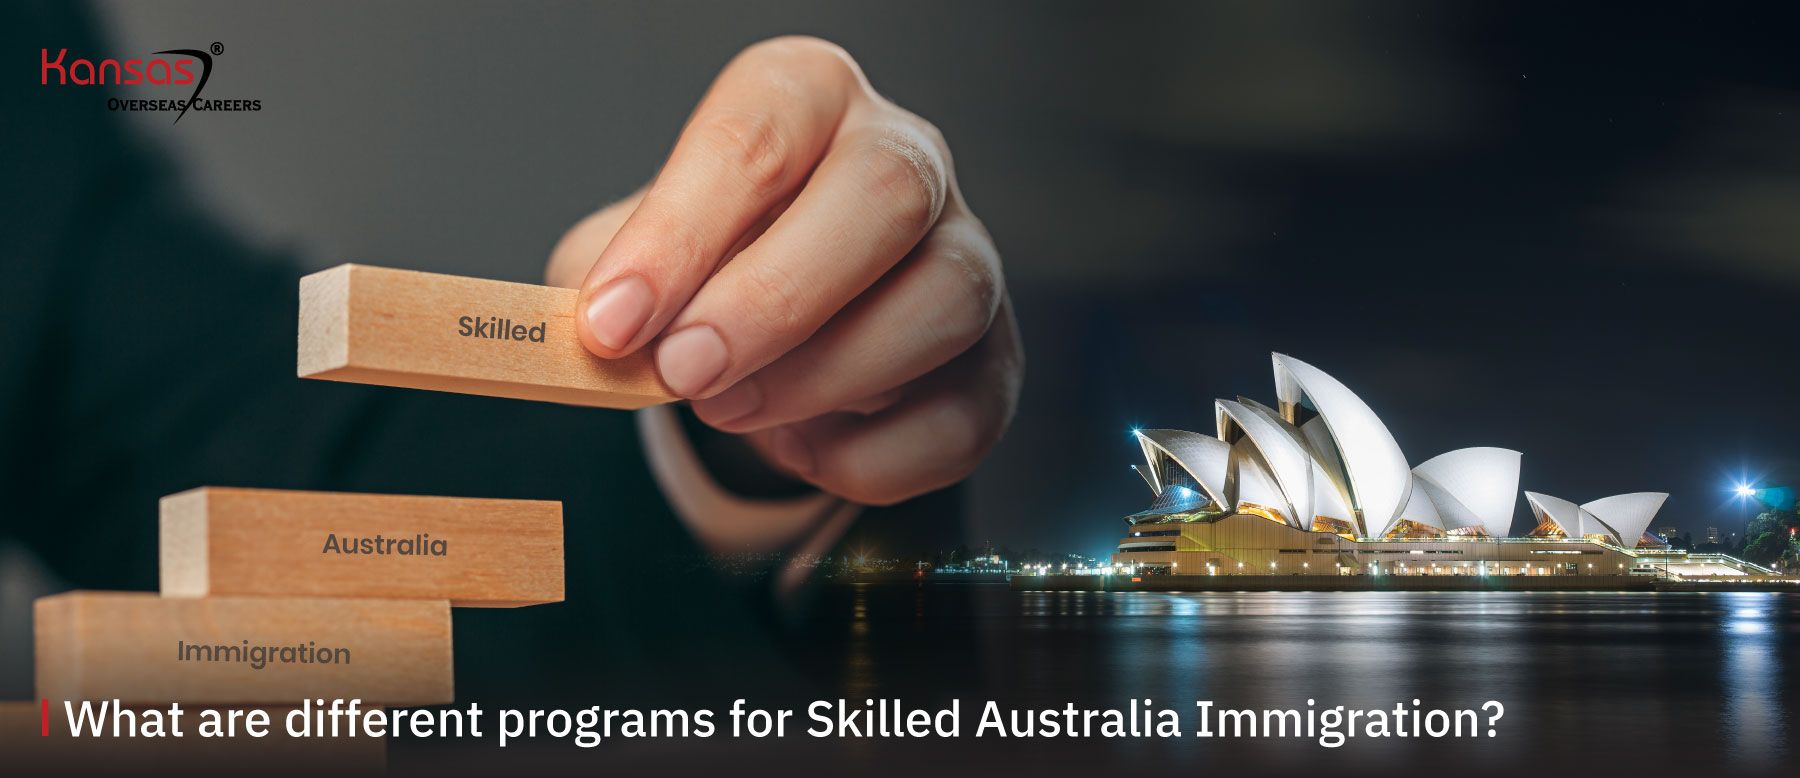 What-are-different-programs-for-Skilled-Australia-Immigration-